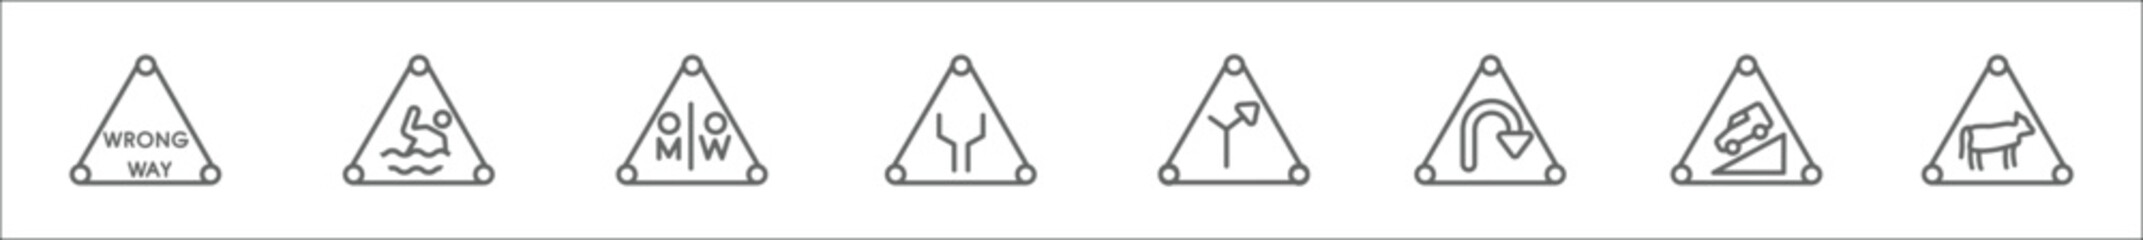 outline set of traffic sign line icons. linear vector icons such as wrong way, swimming, wc, wide road, y intersection, u turn, steep descent, cattle